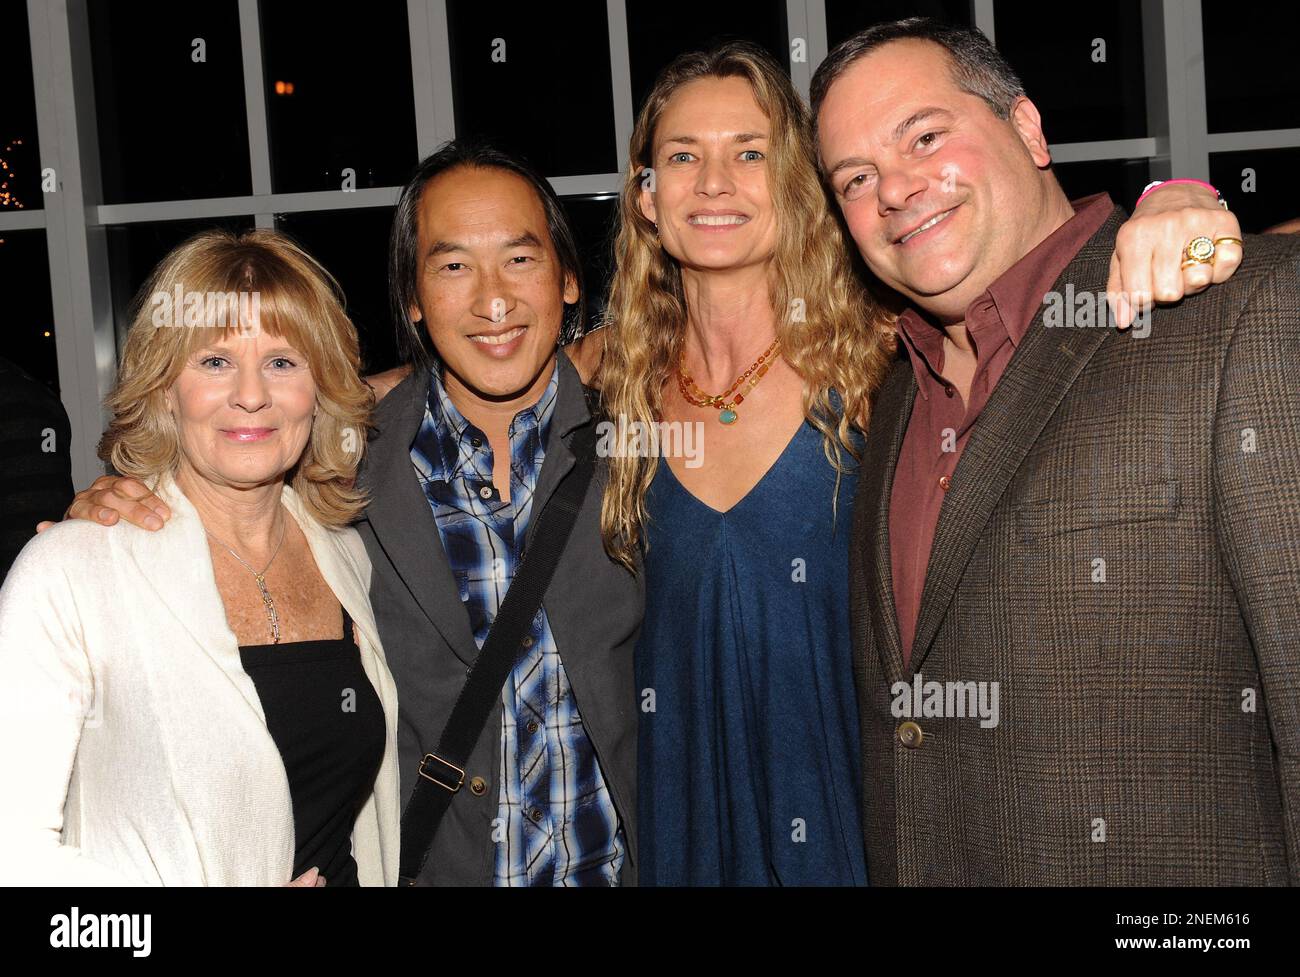 From left, Gaiam president and COO Lynn Powers, Yoga gurus Rodney Yee and  Colleen Saidman and president of retail and DRTV at Gaiam Bill Sondheim  attend the Trudie Styler Mind Body Fitness